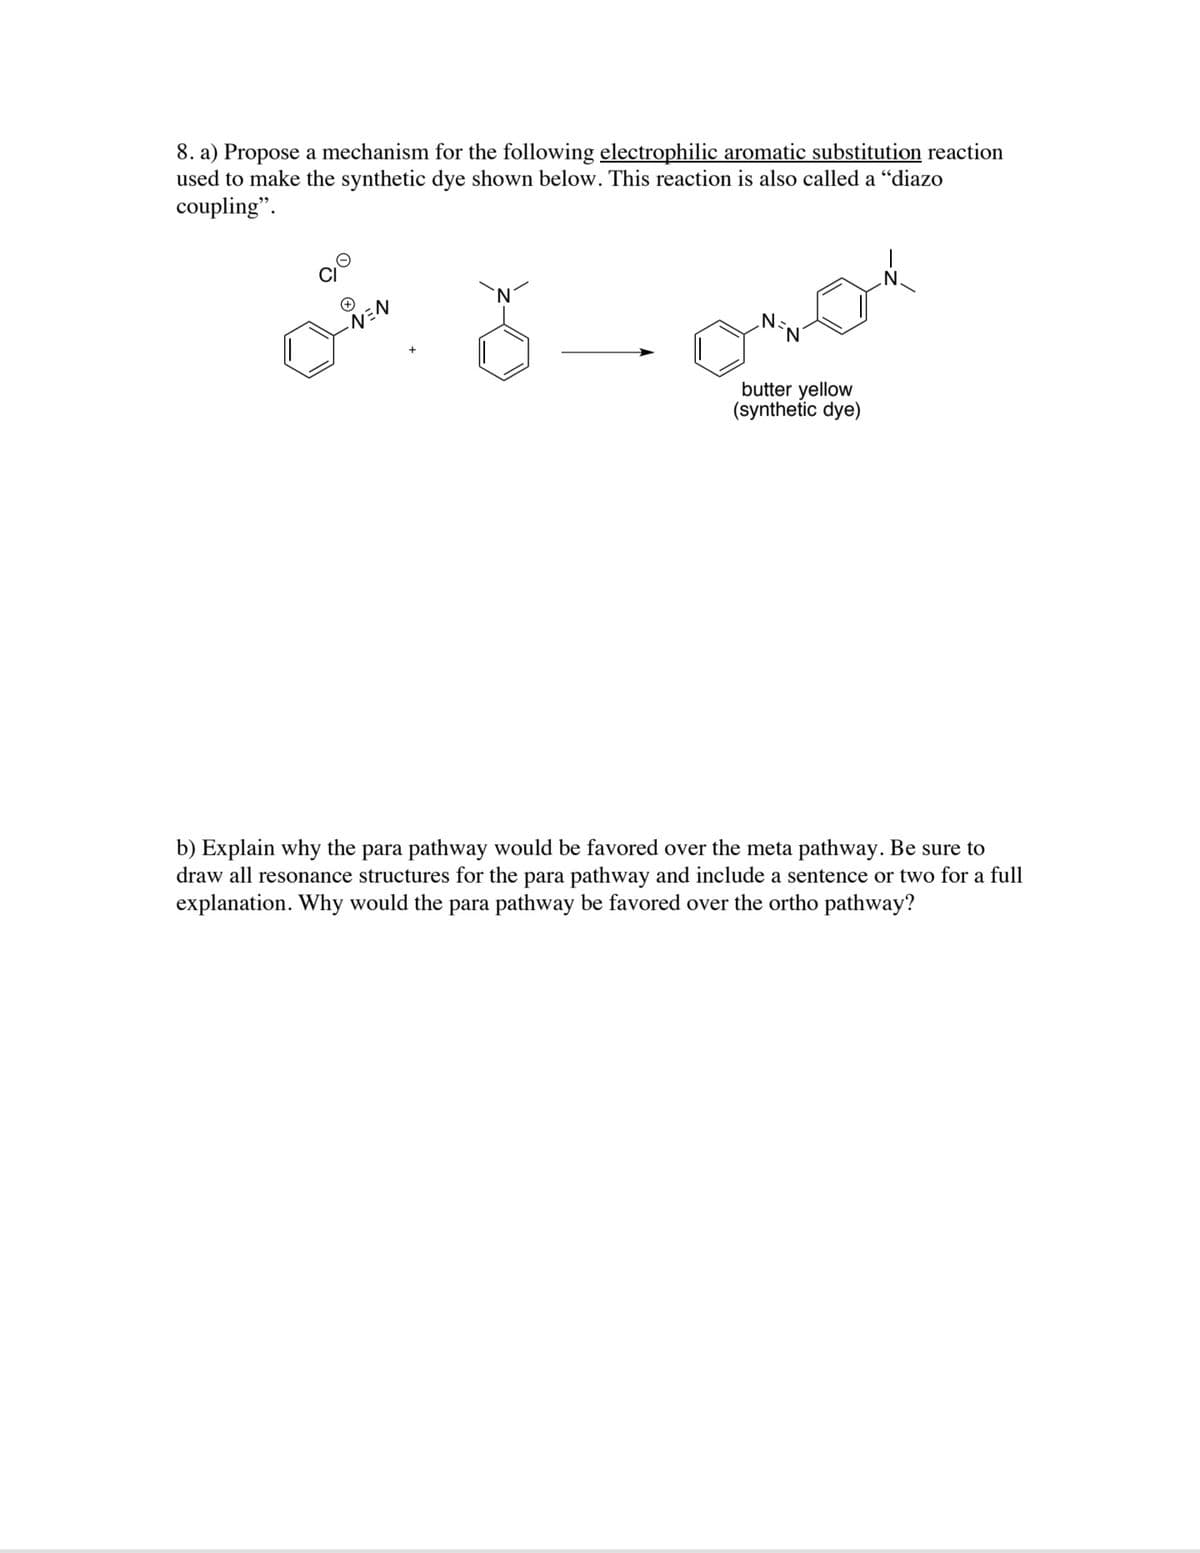 8. a) Propose a mechanism for the following electrophilic aromatic substitution reaction
used to make the synthetic dye shown below. This reaction is also called a "diazo
coupling".
butter yellow
(synthetic dye)
b) Explain why the para pathway would be favored over the meta pathway. Be sure to
draw all resonance structures for the para pathway and include a sentence or two for a full
explanation. Why would the para pathway be favored over the ortho pathway?
